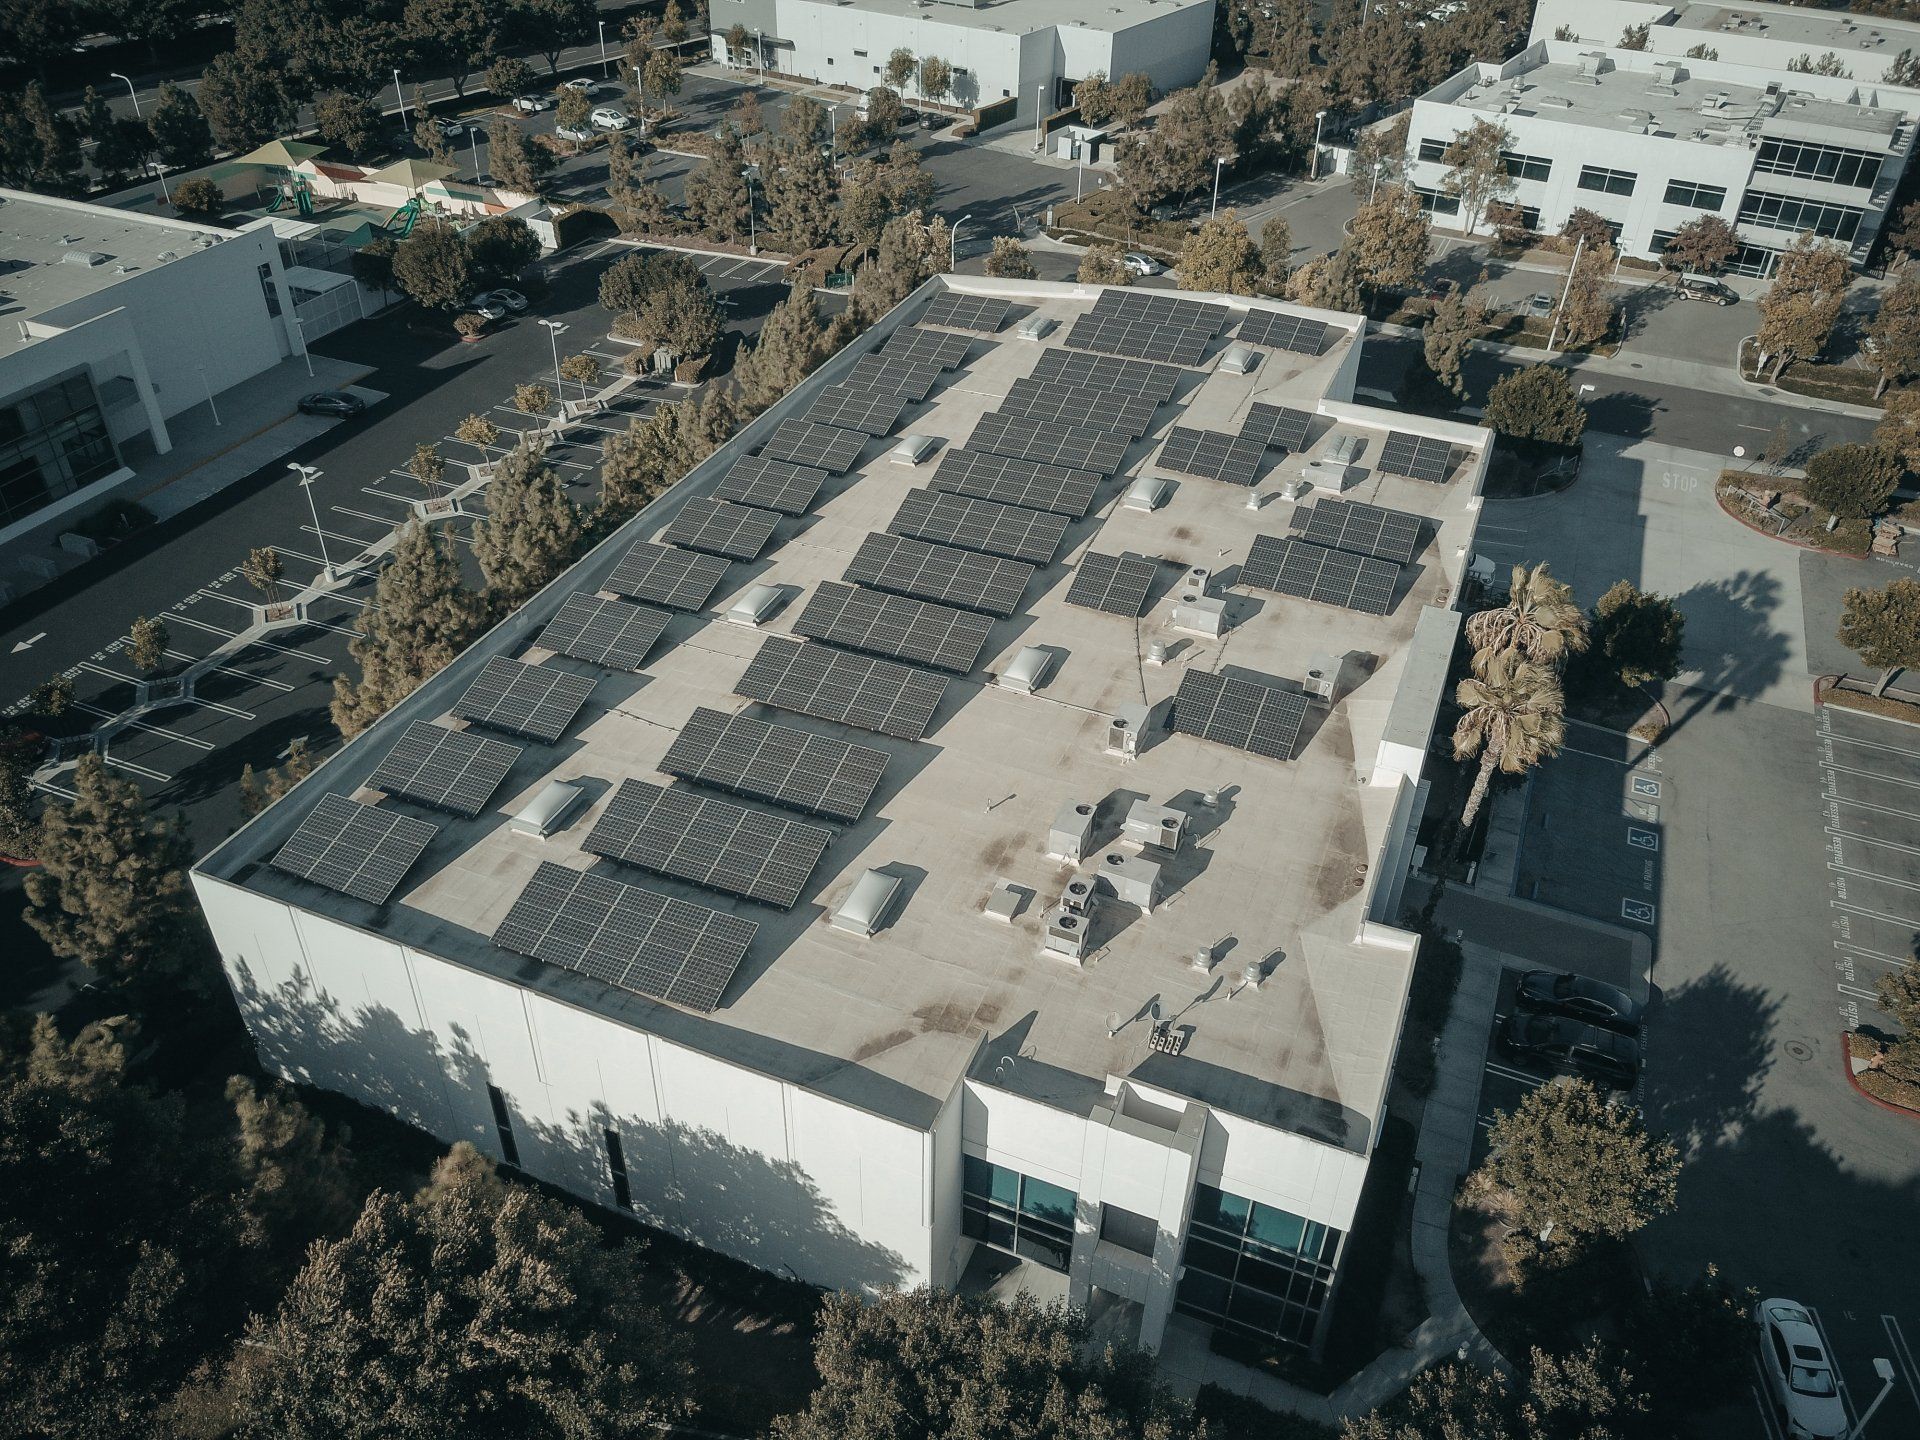 Overhead view of school building with solar panel system installed